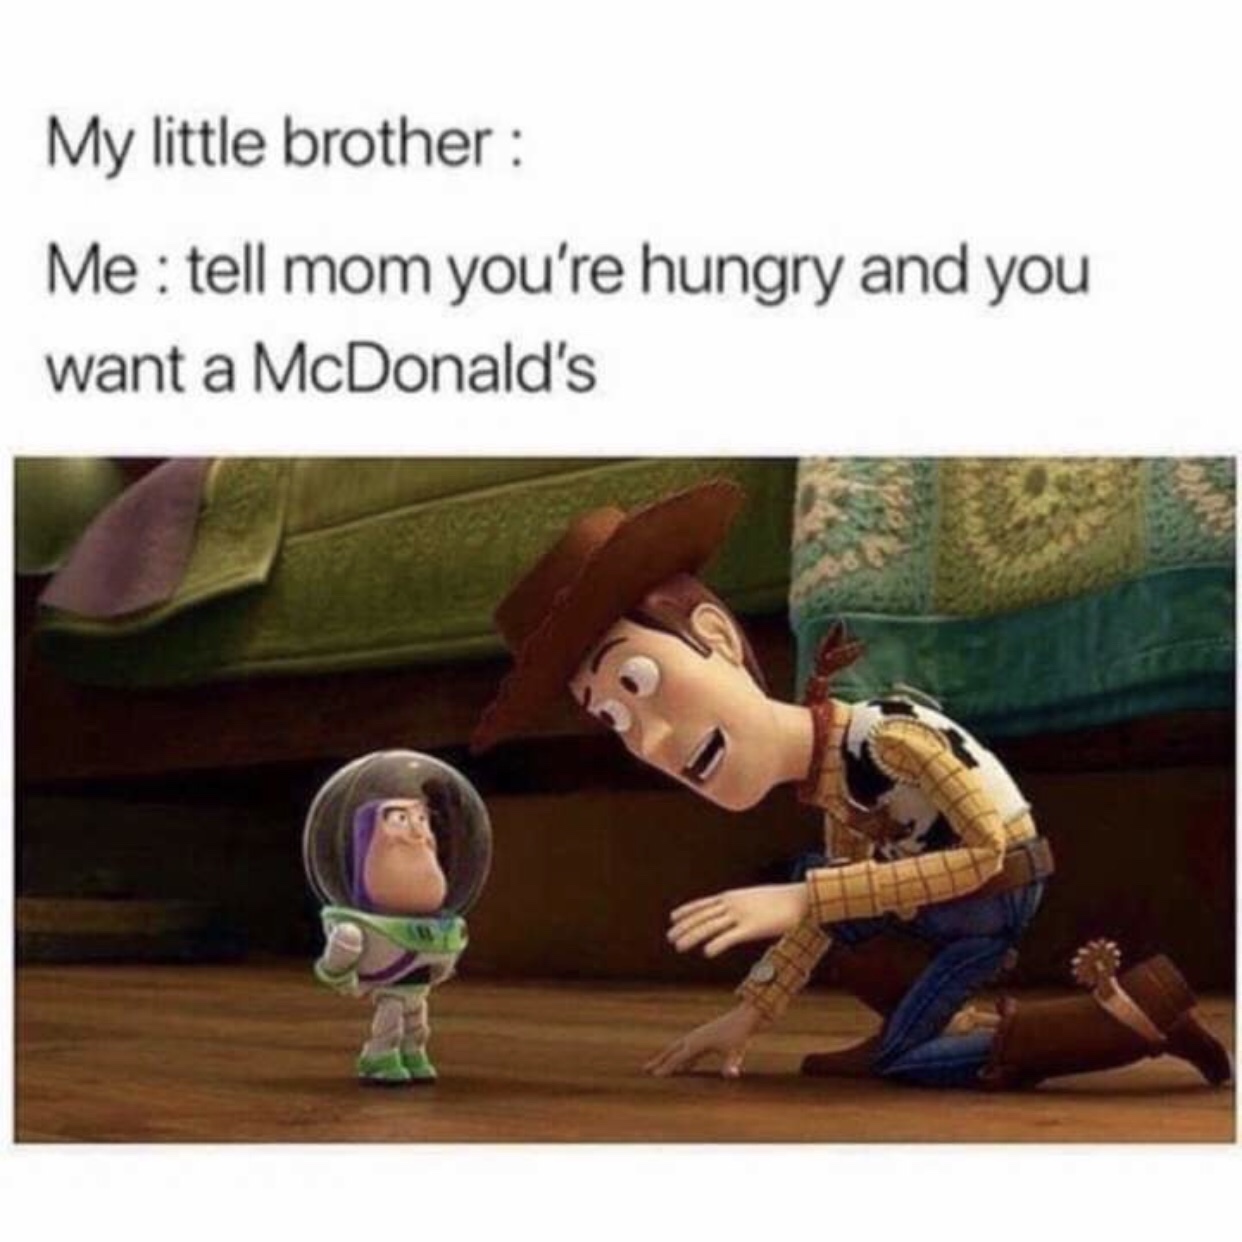 Disney meme - you re a little buzzed - My little brother Me tell mom you're hungry and you want a McDonald's